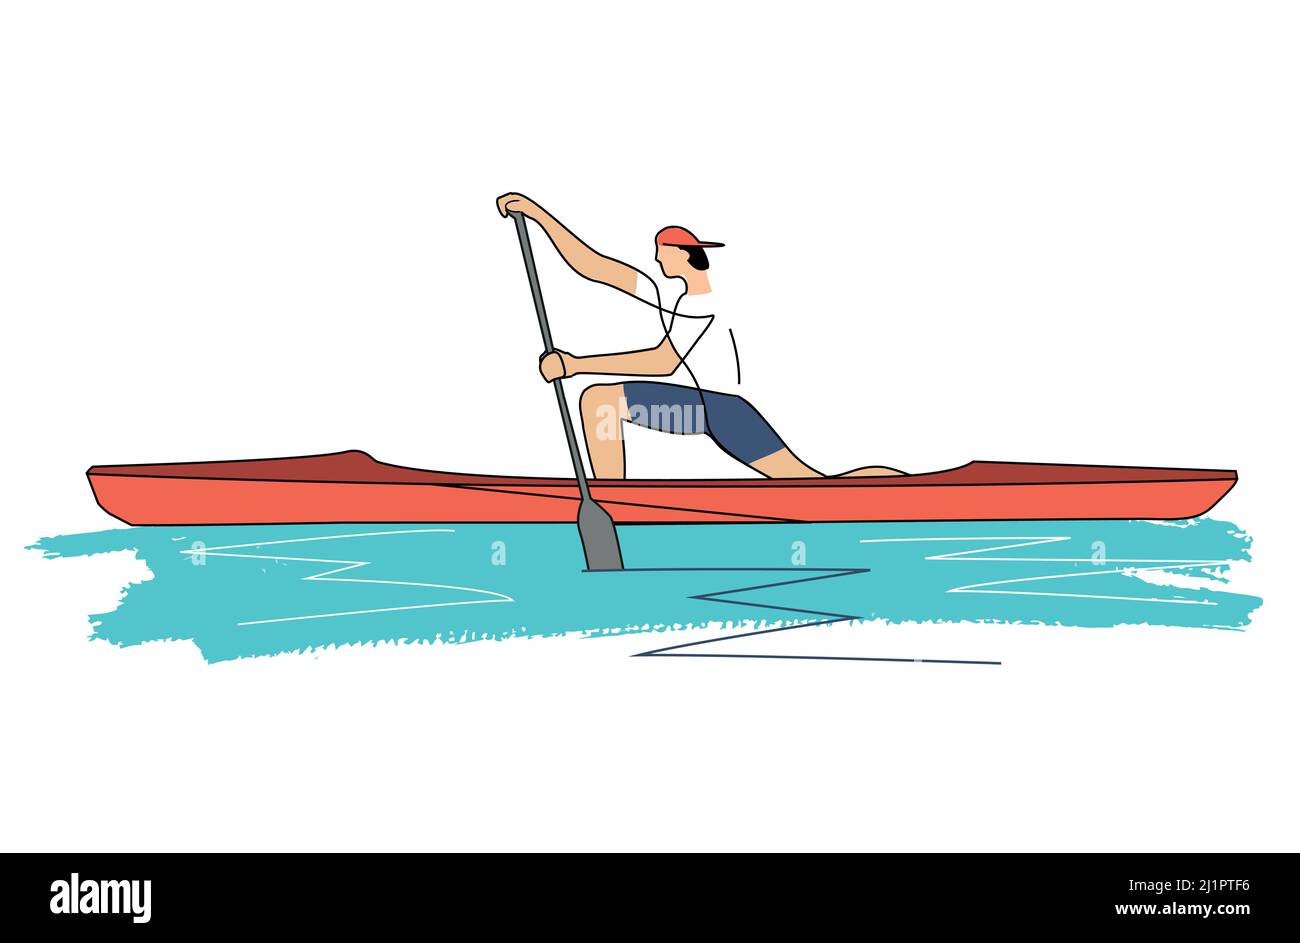 Canoe sprint, man athlete standing in support on one knee in single canoe. Line art stylized Illustration of canoeing. Isolated on white background. Stock Vector